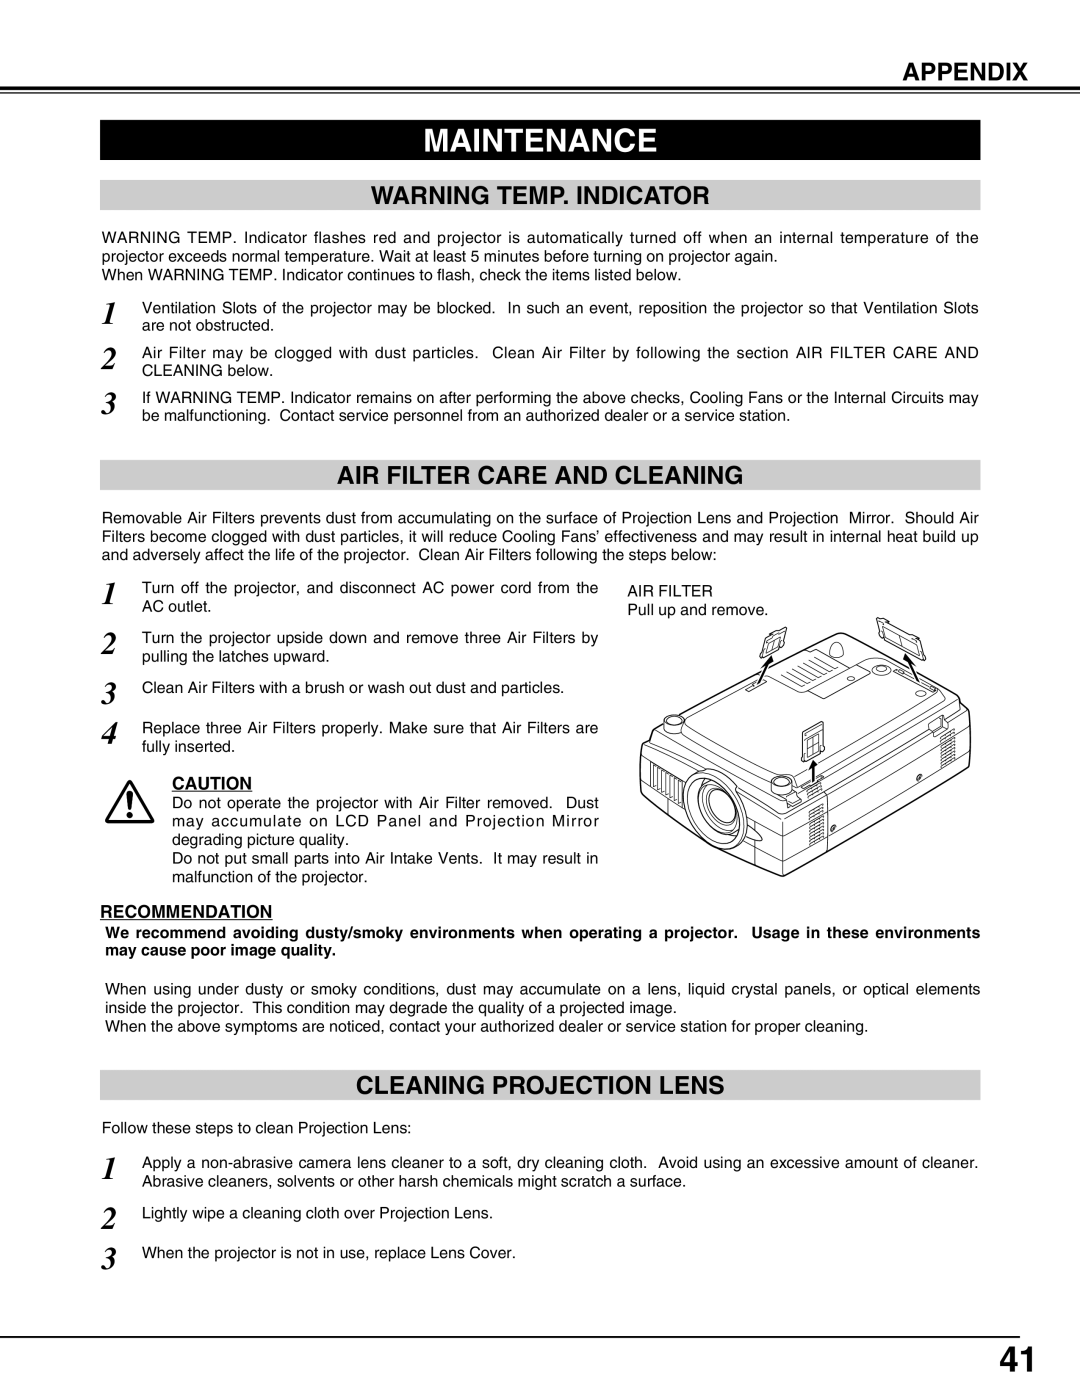 Sanyo PLC-XT10A Maintenance, Appendix, Warning Temp. Indicator, Air Filter Care And Cleaning, Cleaning Projection Lens 